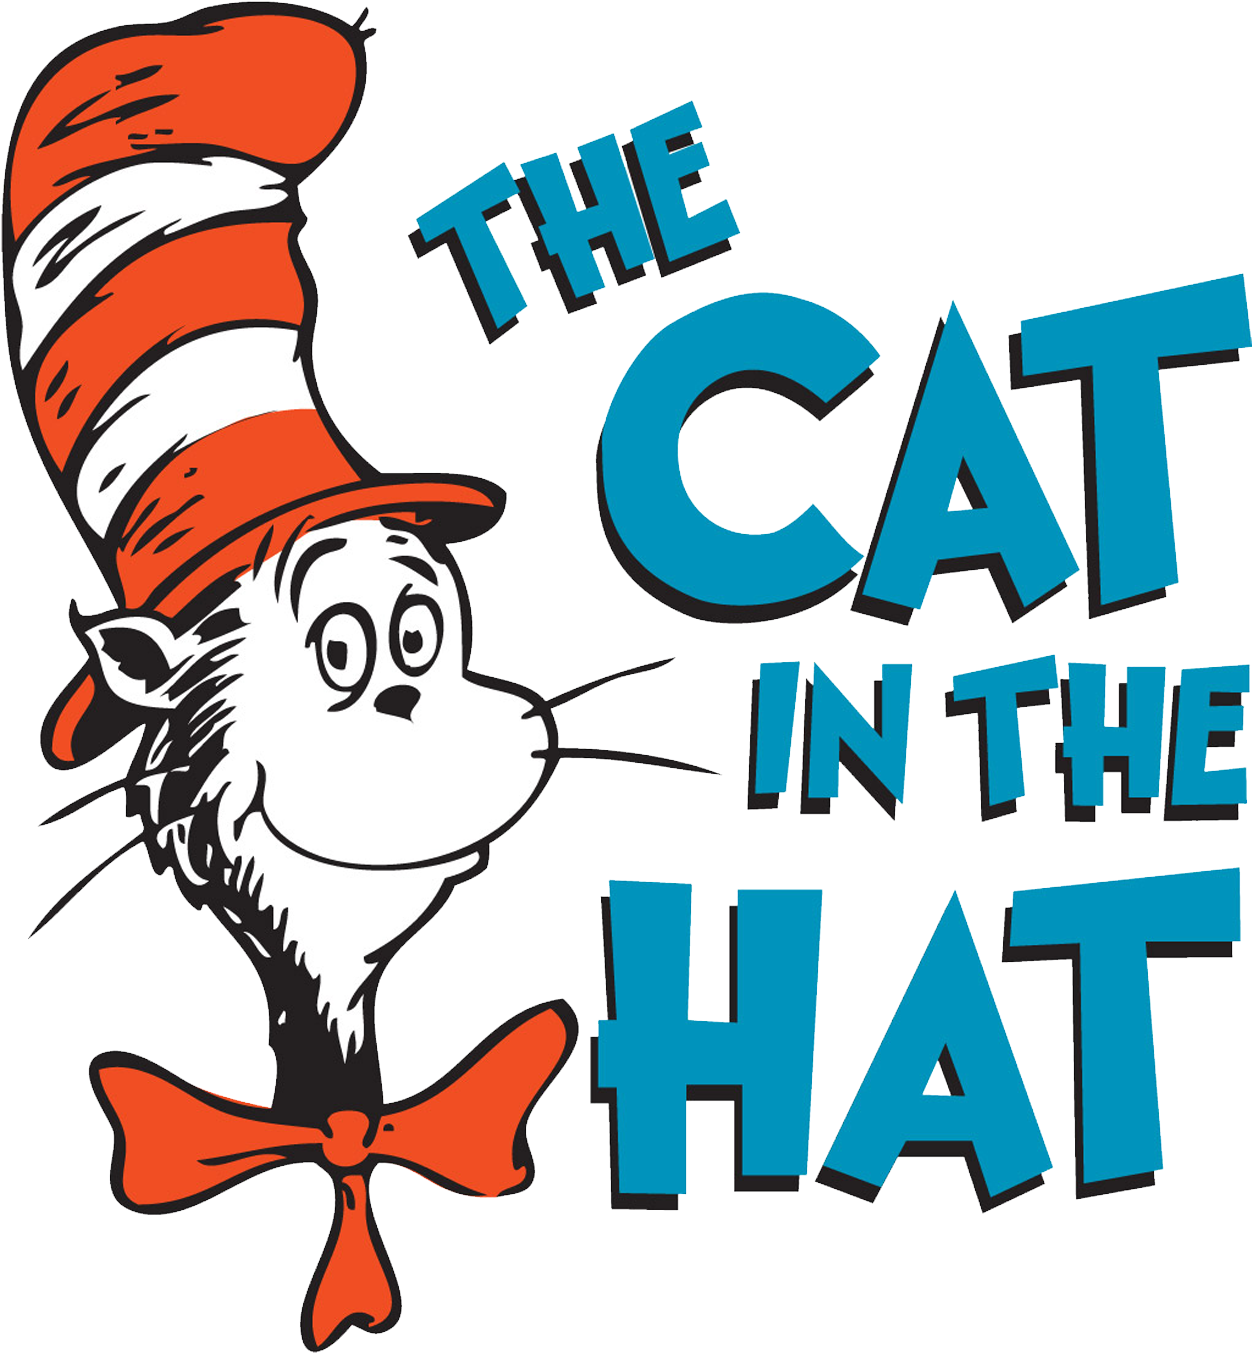 Catinthe Hat Character Illustration PNG image